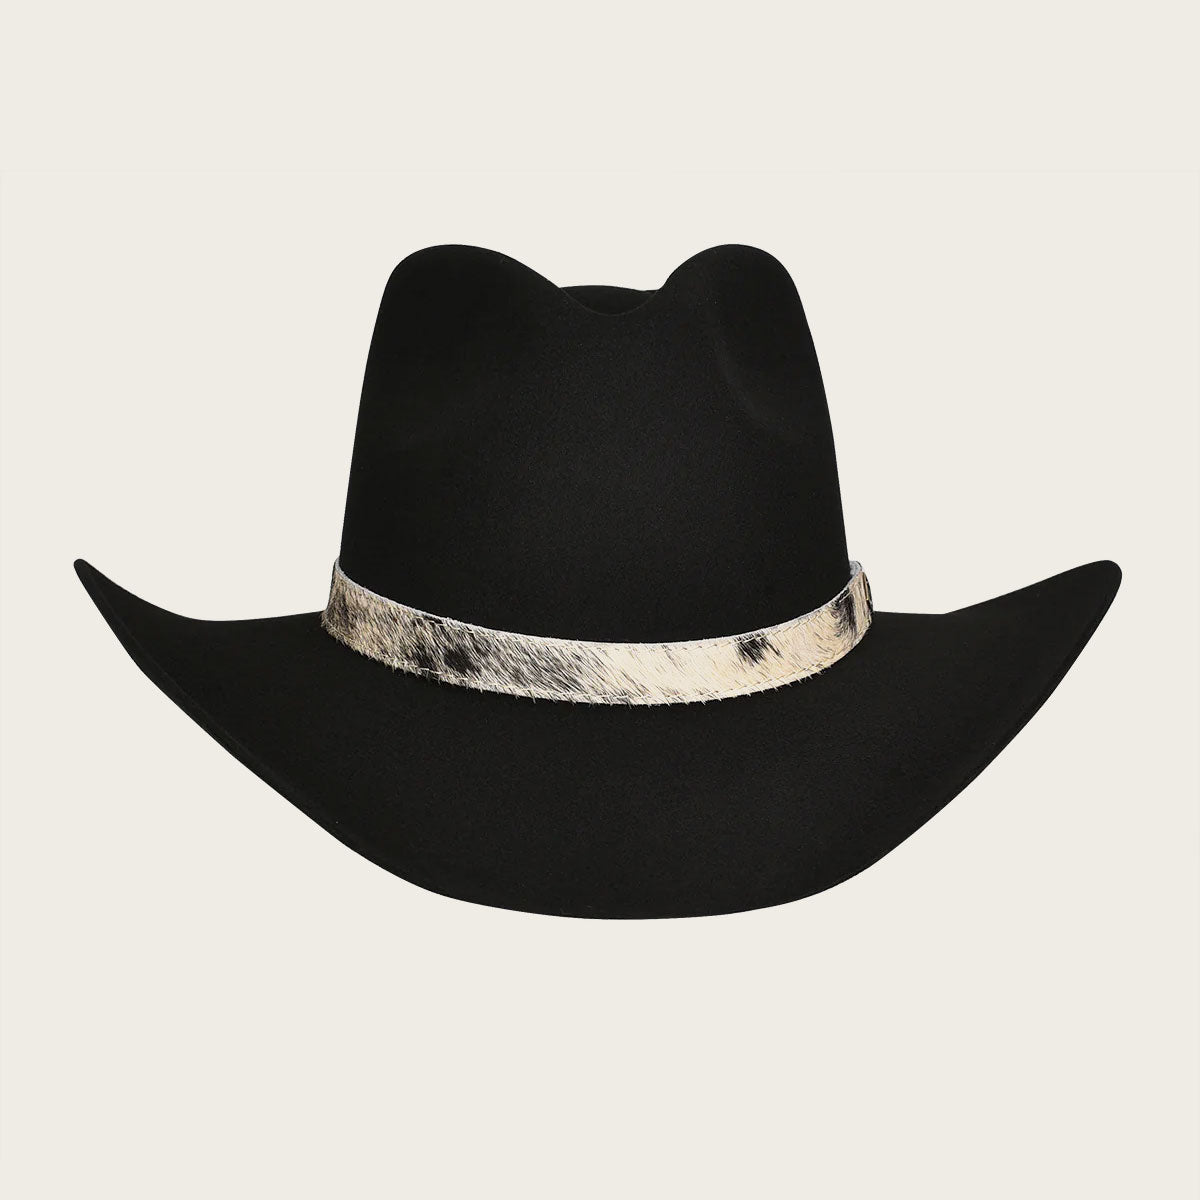 Cowboy Hats: Elevate Your Style with Timeless Western Headwear